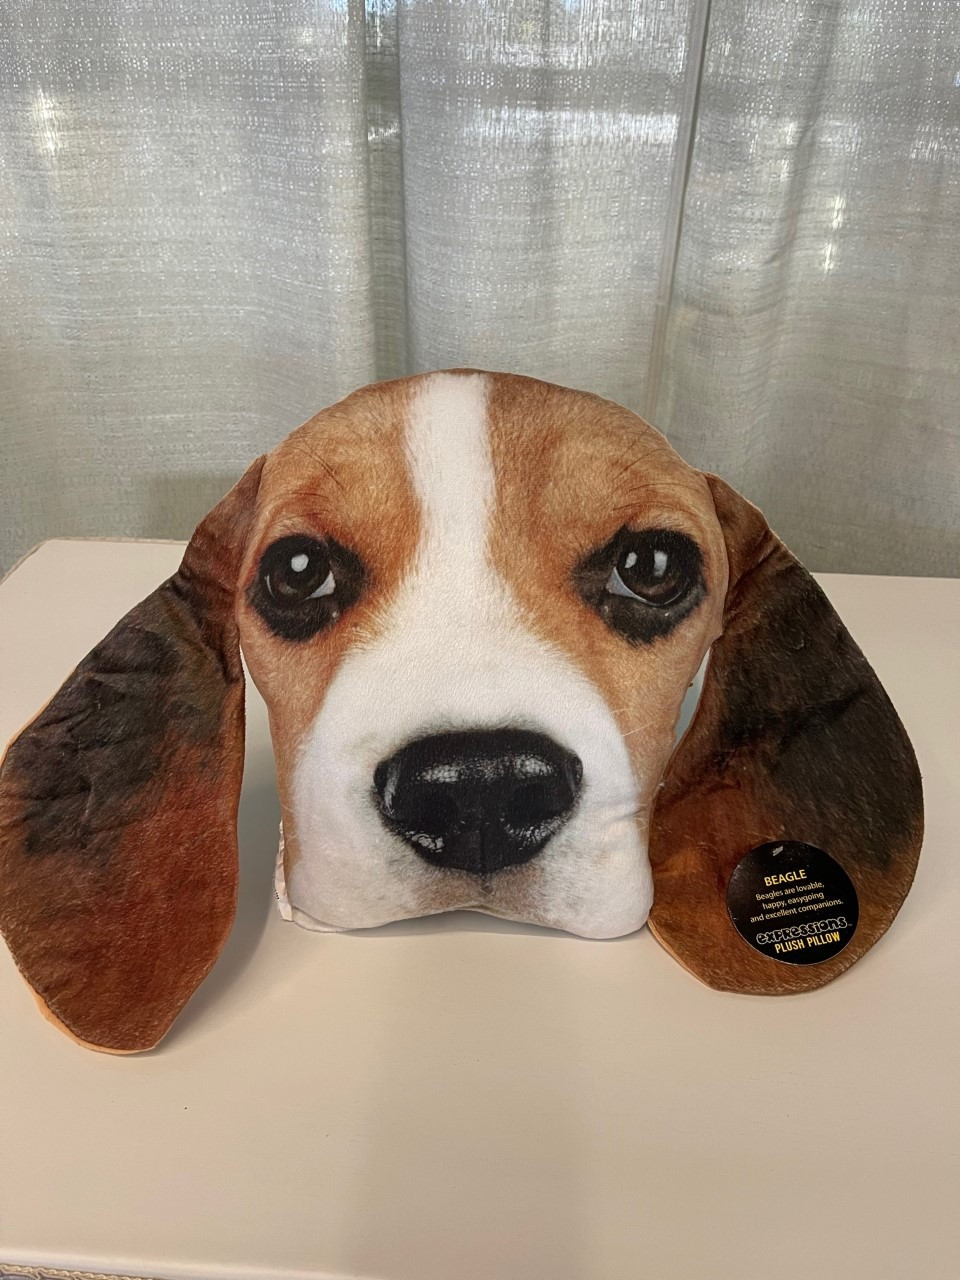 Beagle Pillow (approx. 16 " wide (from ear to ear) x 10" long (top of head to bottom of mouth)